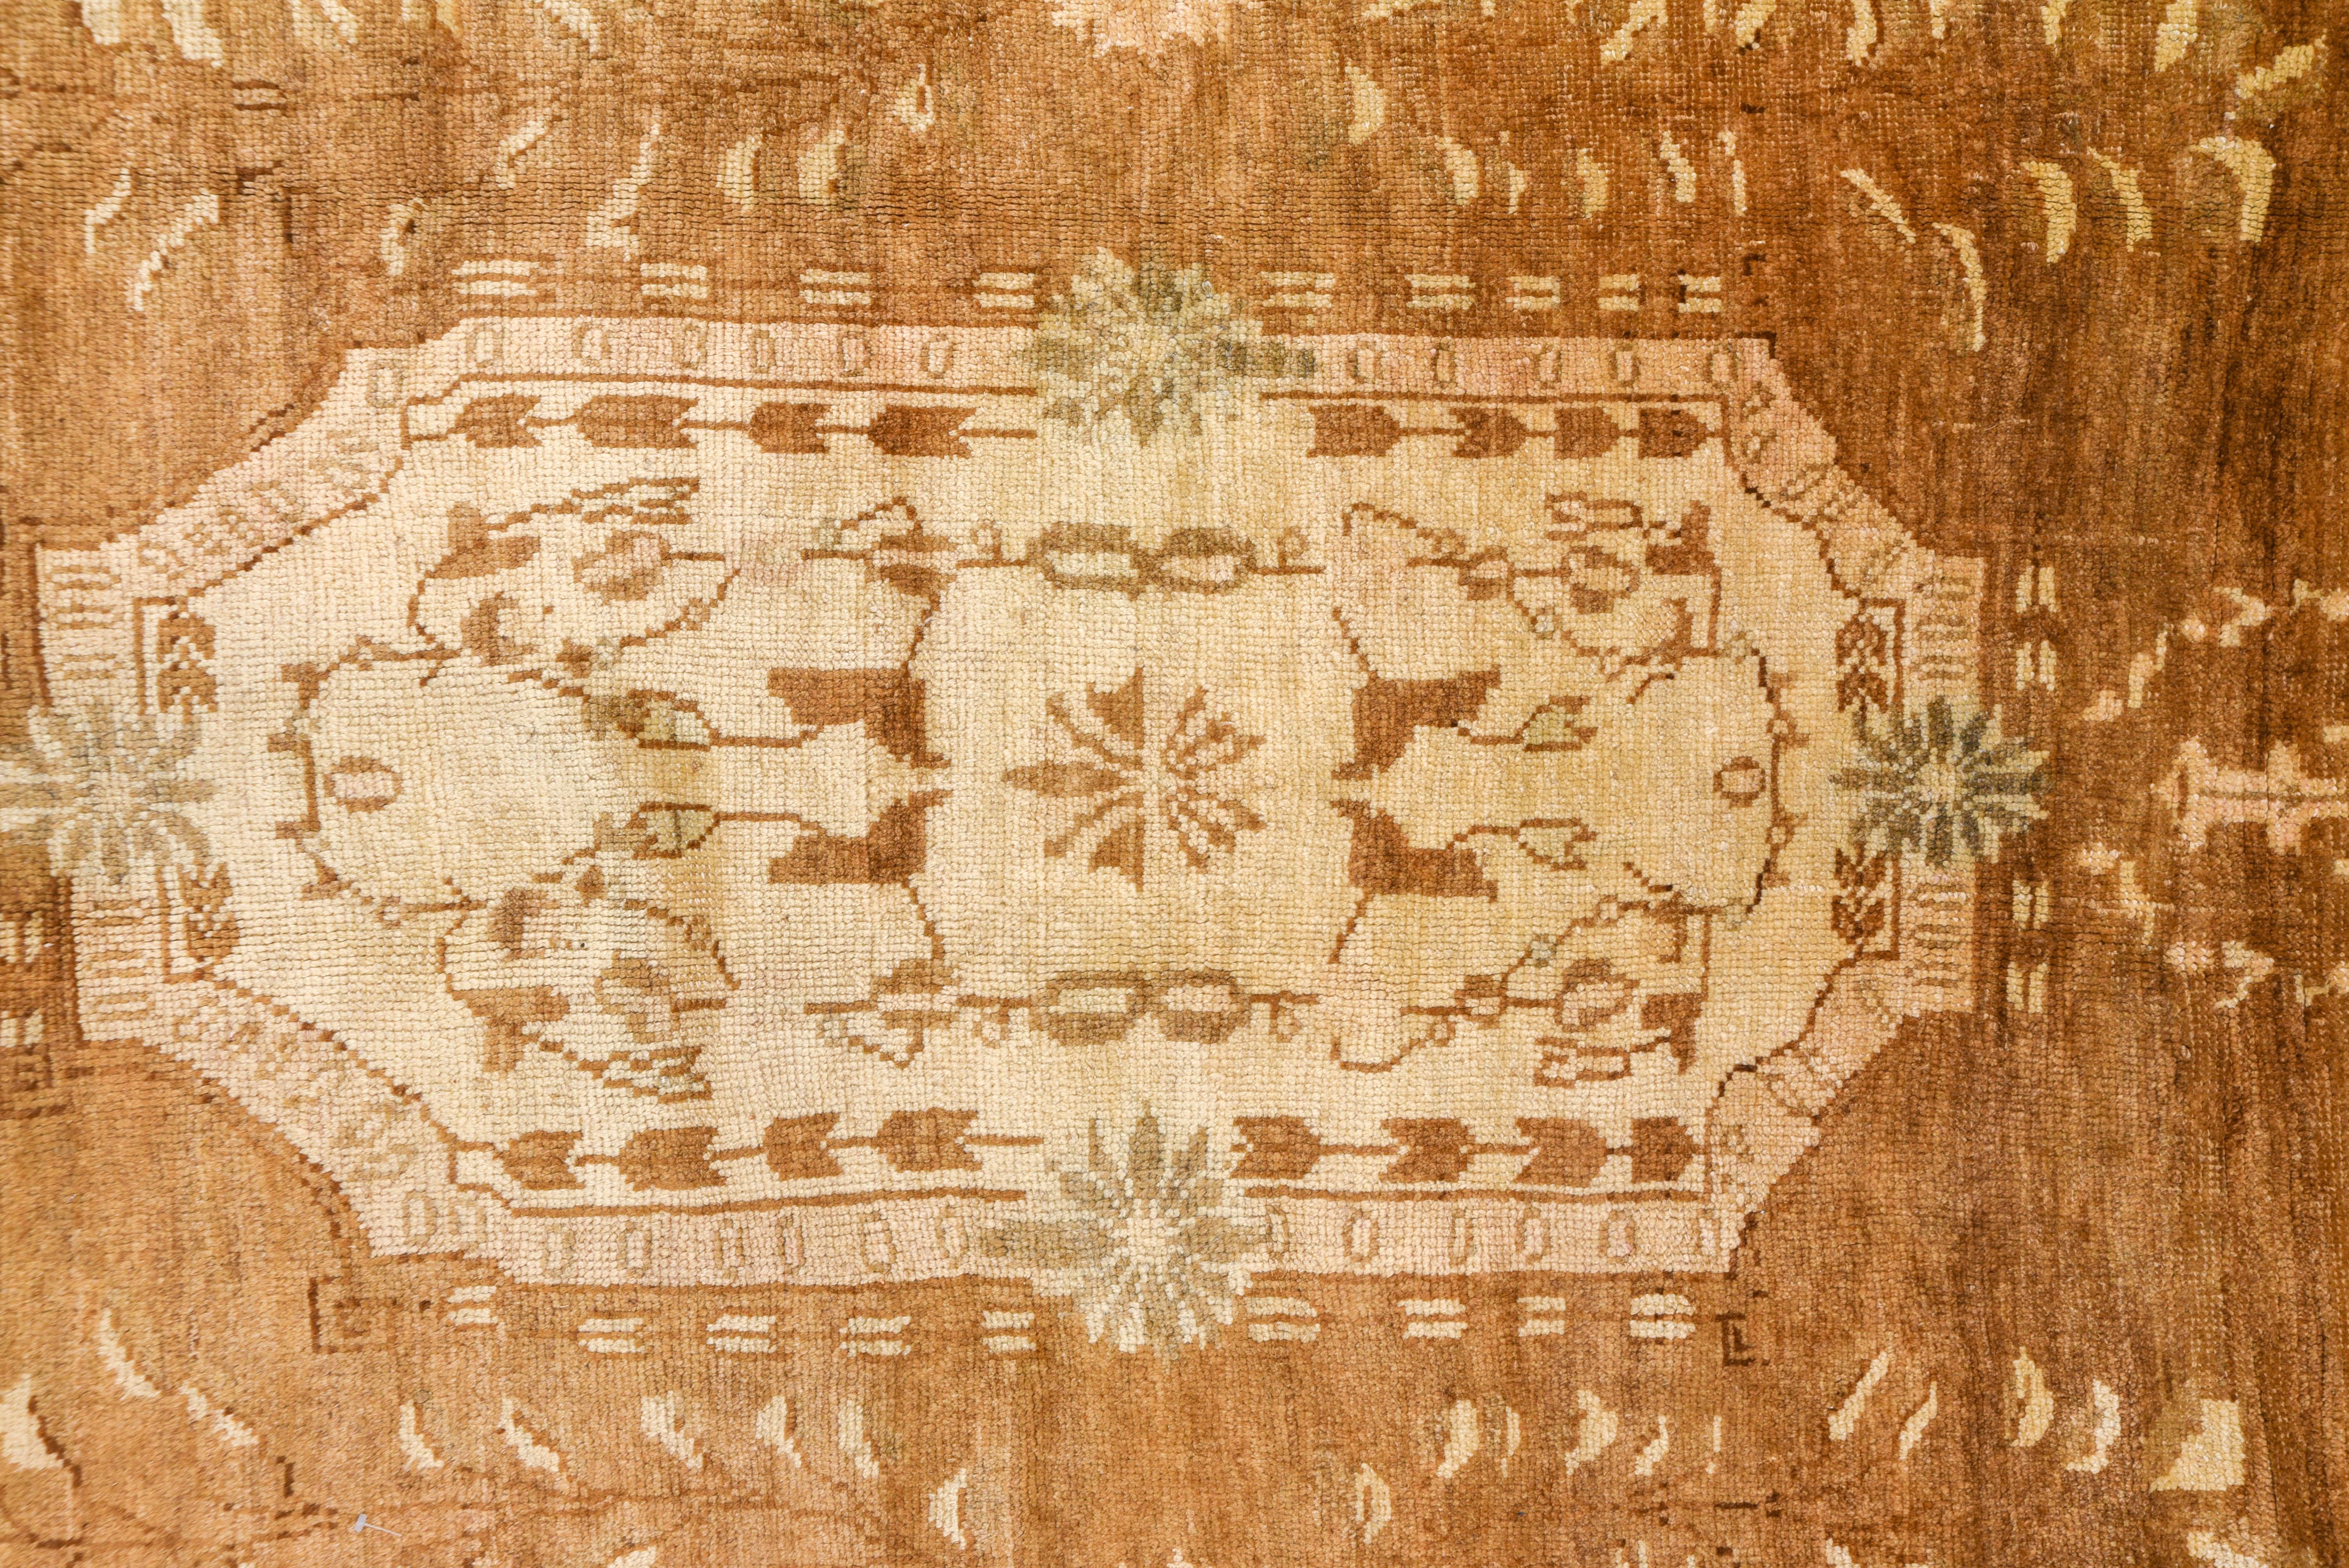 Hand-Knotted Mid-20th Century Brown Turkish Kars Rug, Brown Field, circa 1950s For Sale